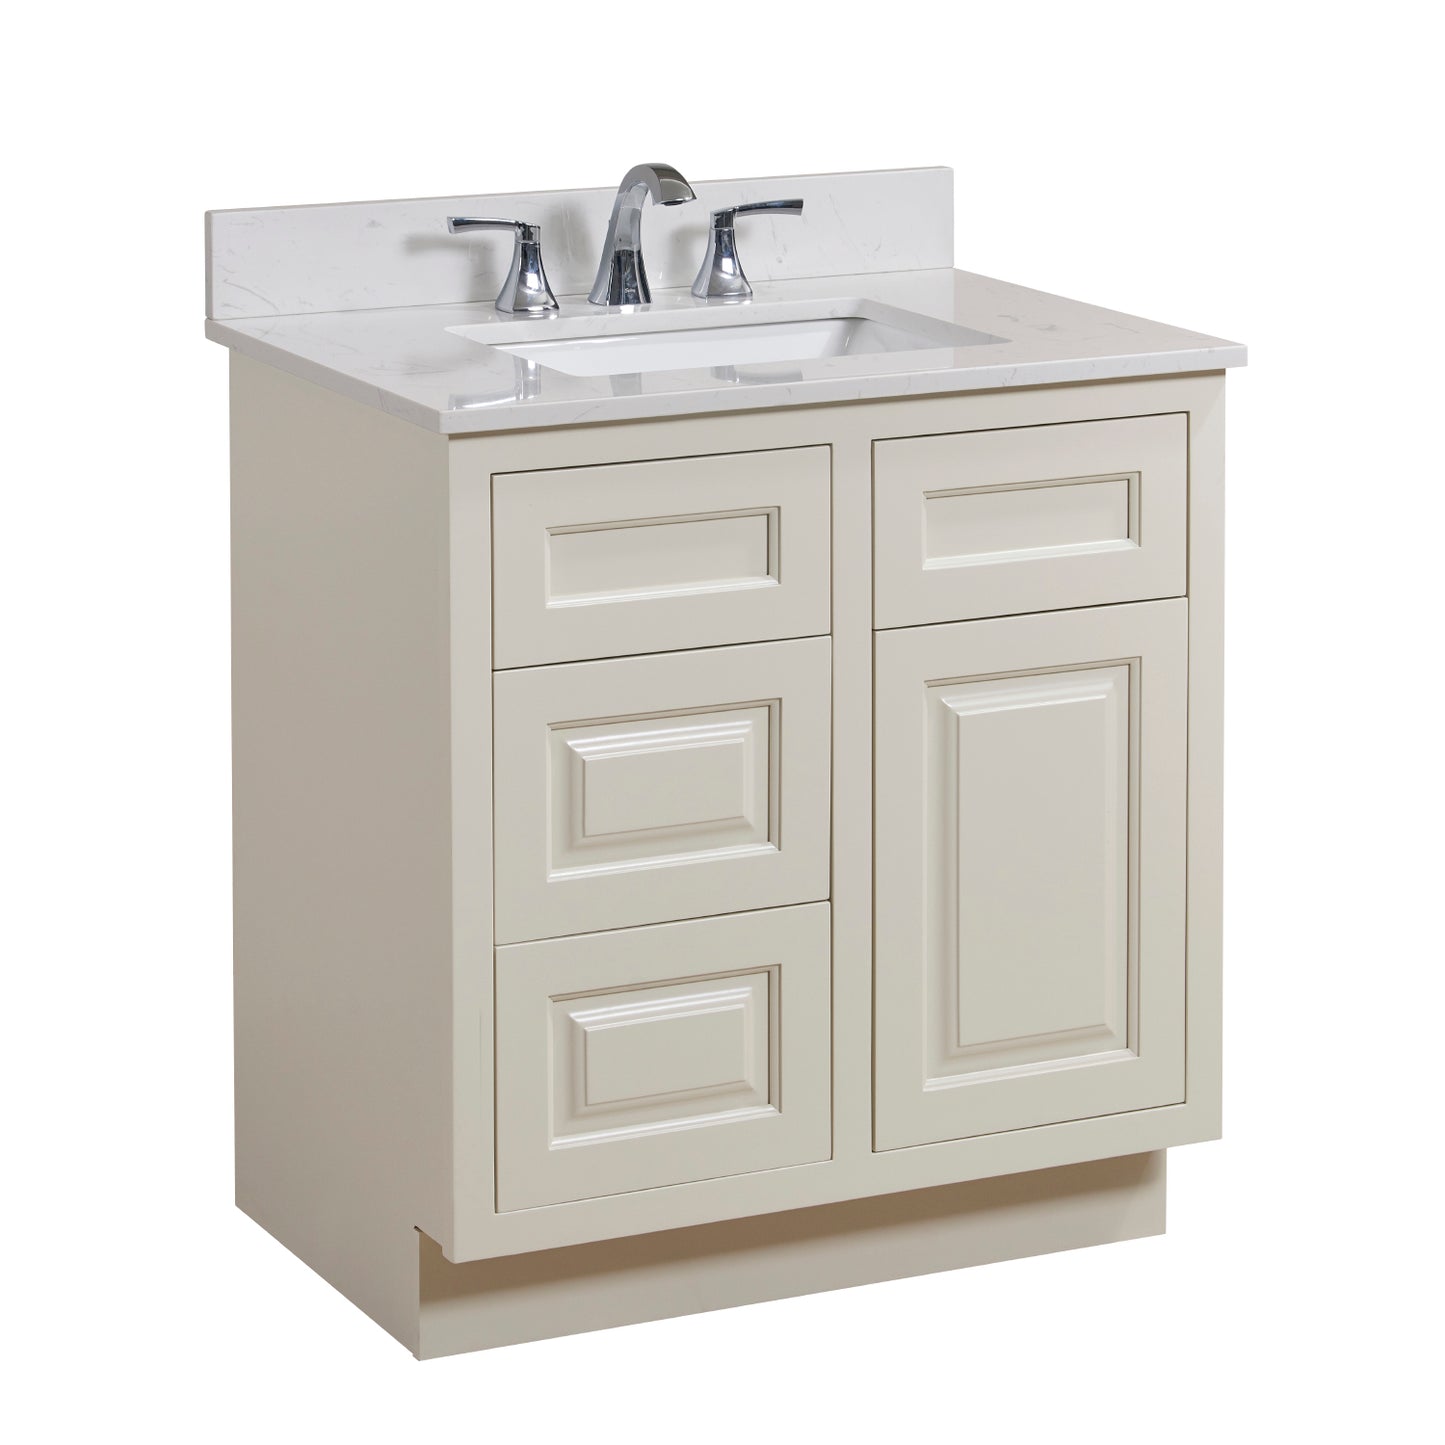 31 in. Stone effects Vanity Top in Jazz White with White Sink